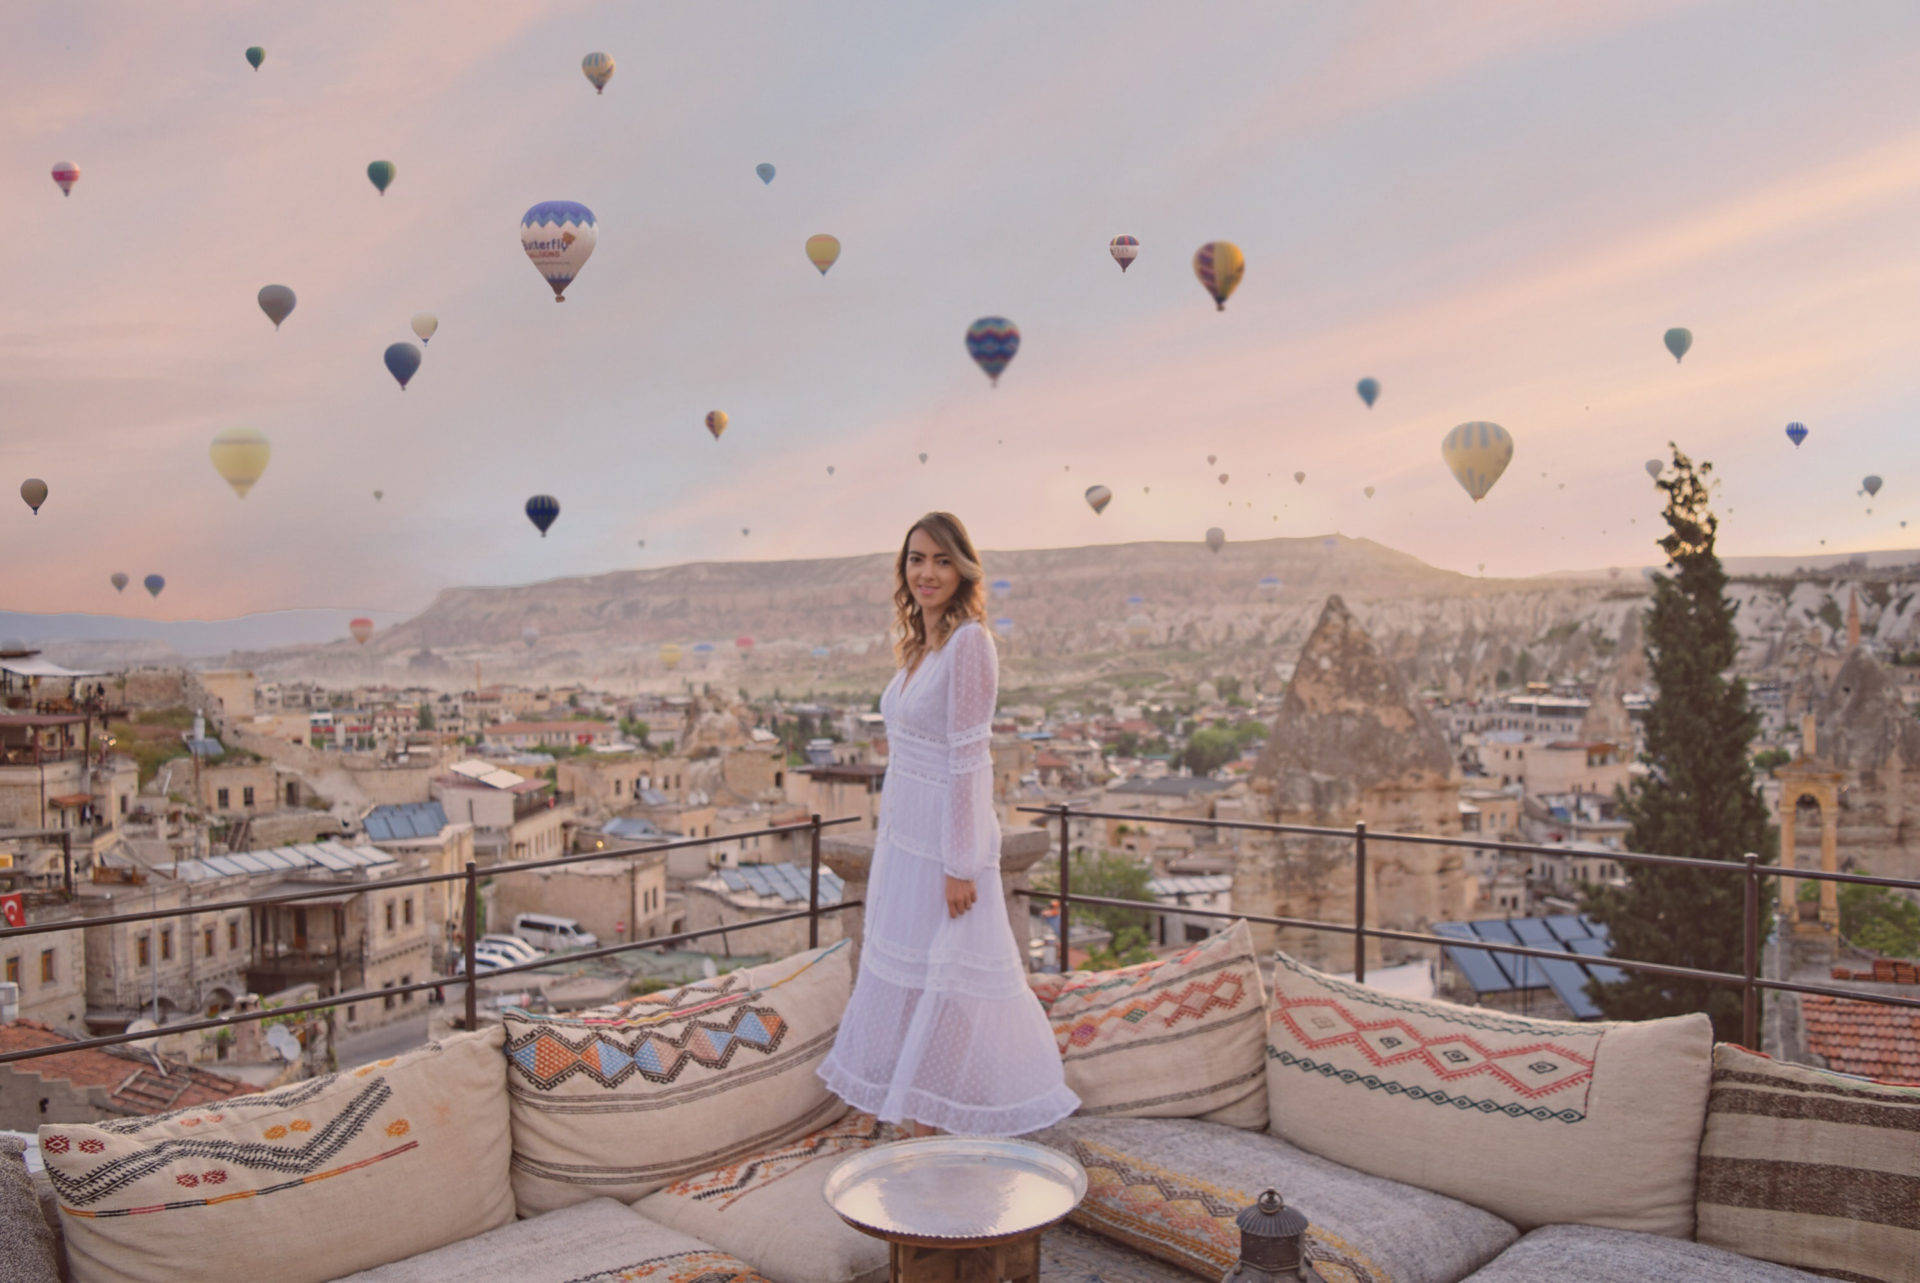 Hot Air Balloon Istanbul Background